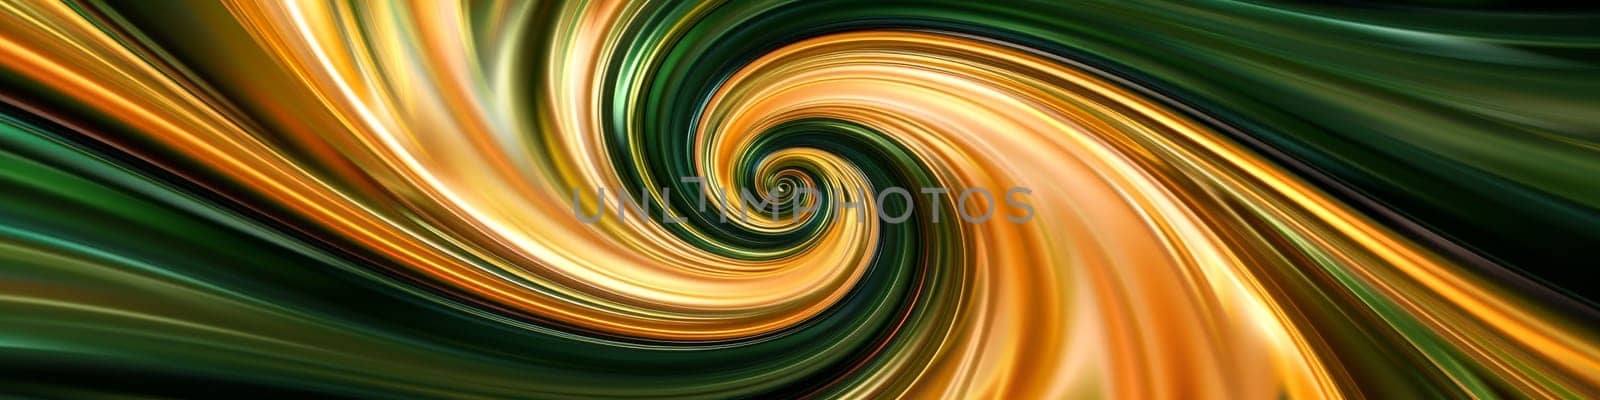 Gold and green abstract vortex as background or texture by Kadula